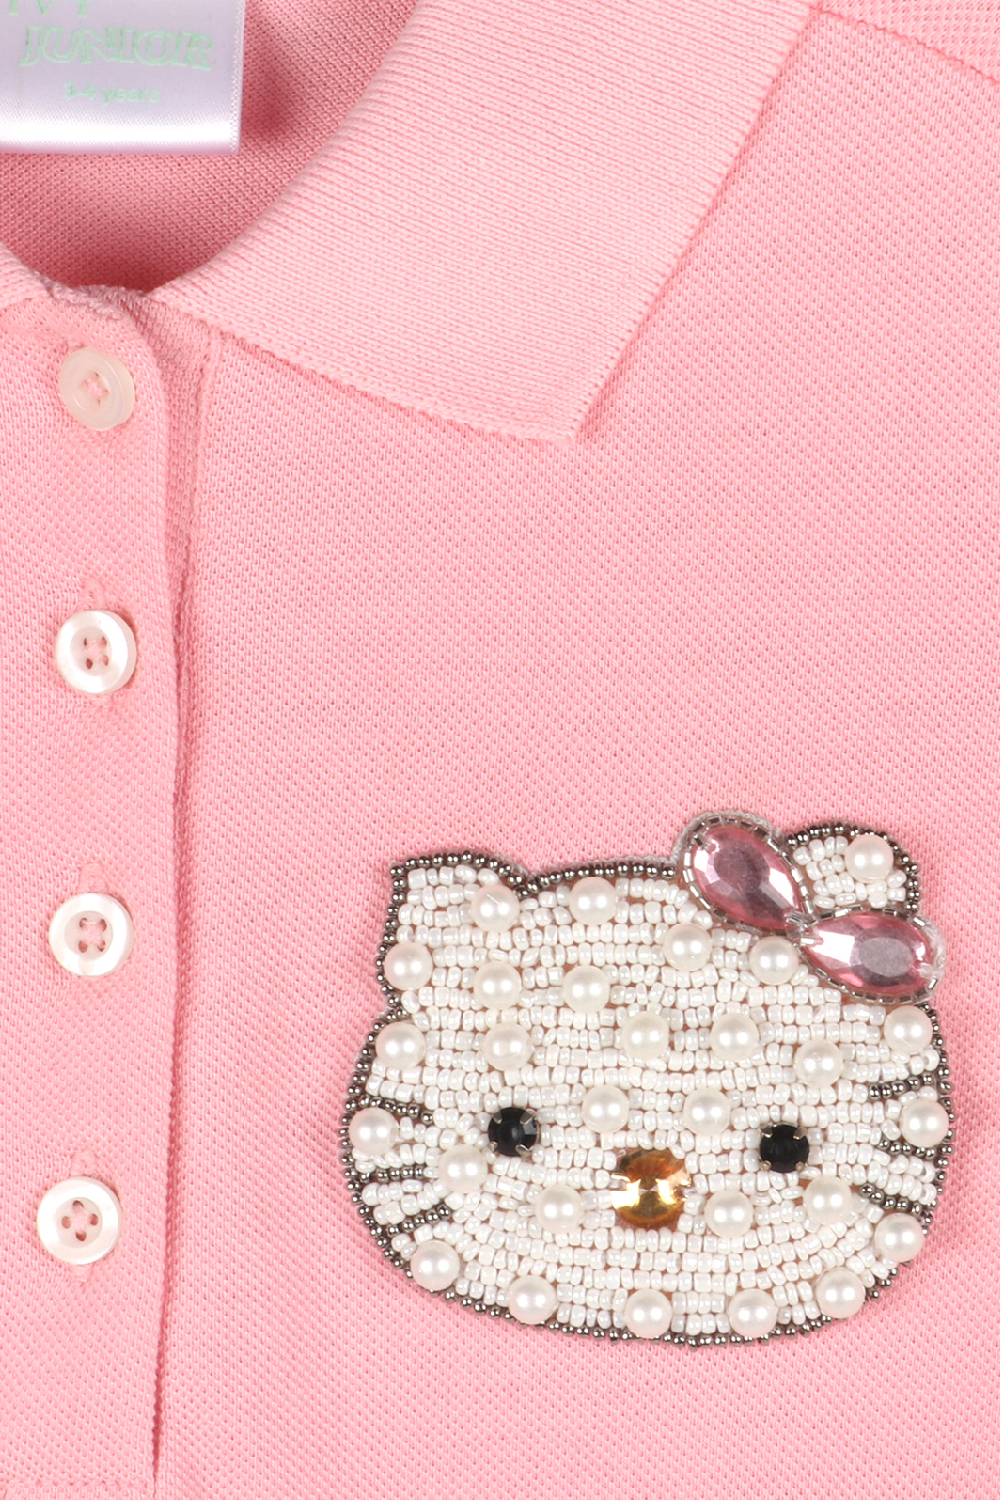 Girls Polo Dress With Ruffles At Hem And Hello Kitty Motif